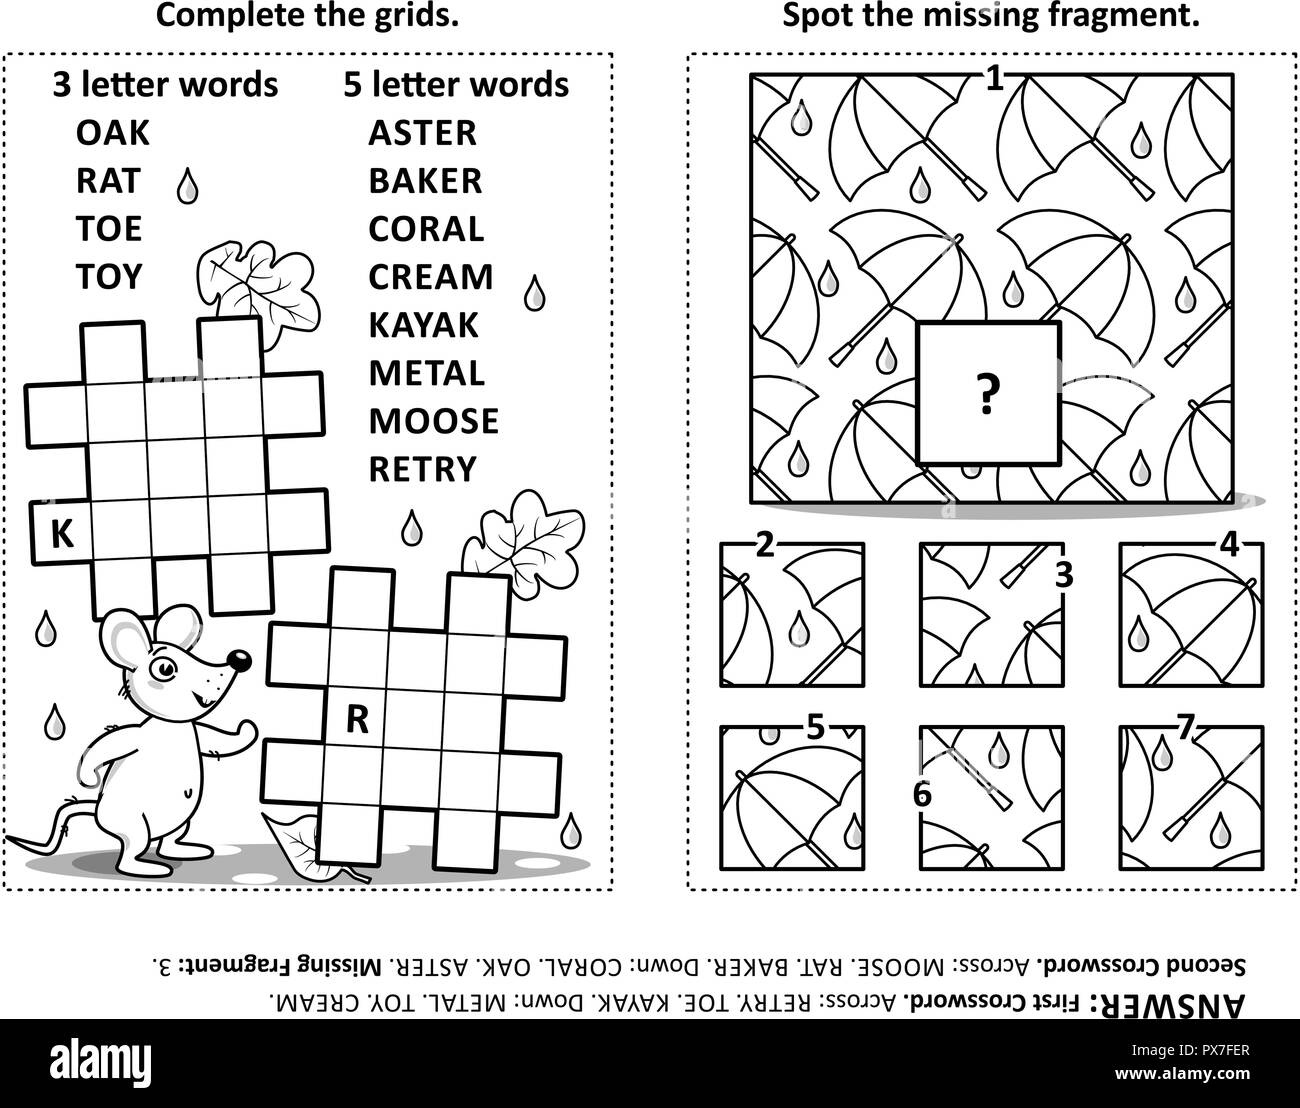 Activity page with two puzzles. Fill-in crossword puzzle or word game. Spot the missing fragment of the pattern. Black and white. Answers included. Stock Vector